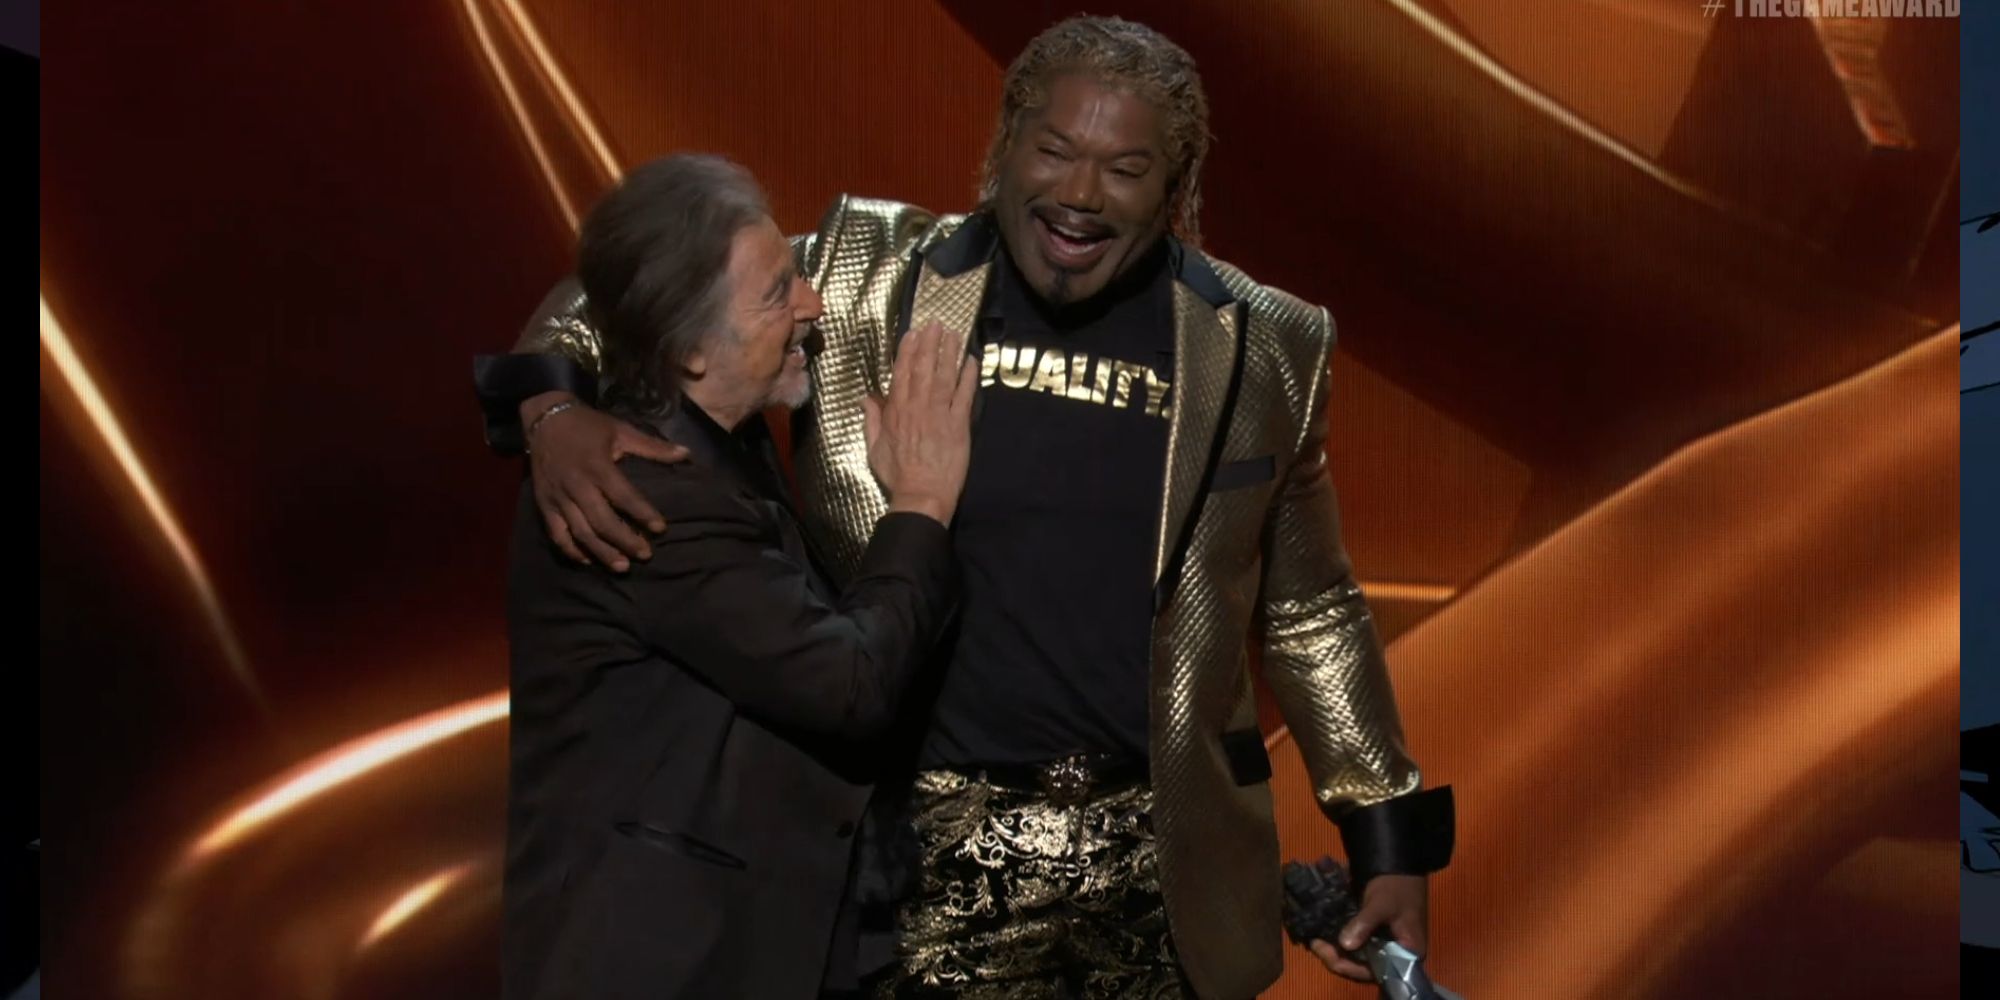 christopher judge with al pacino on stage at the game awards